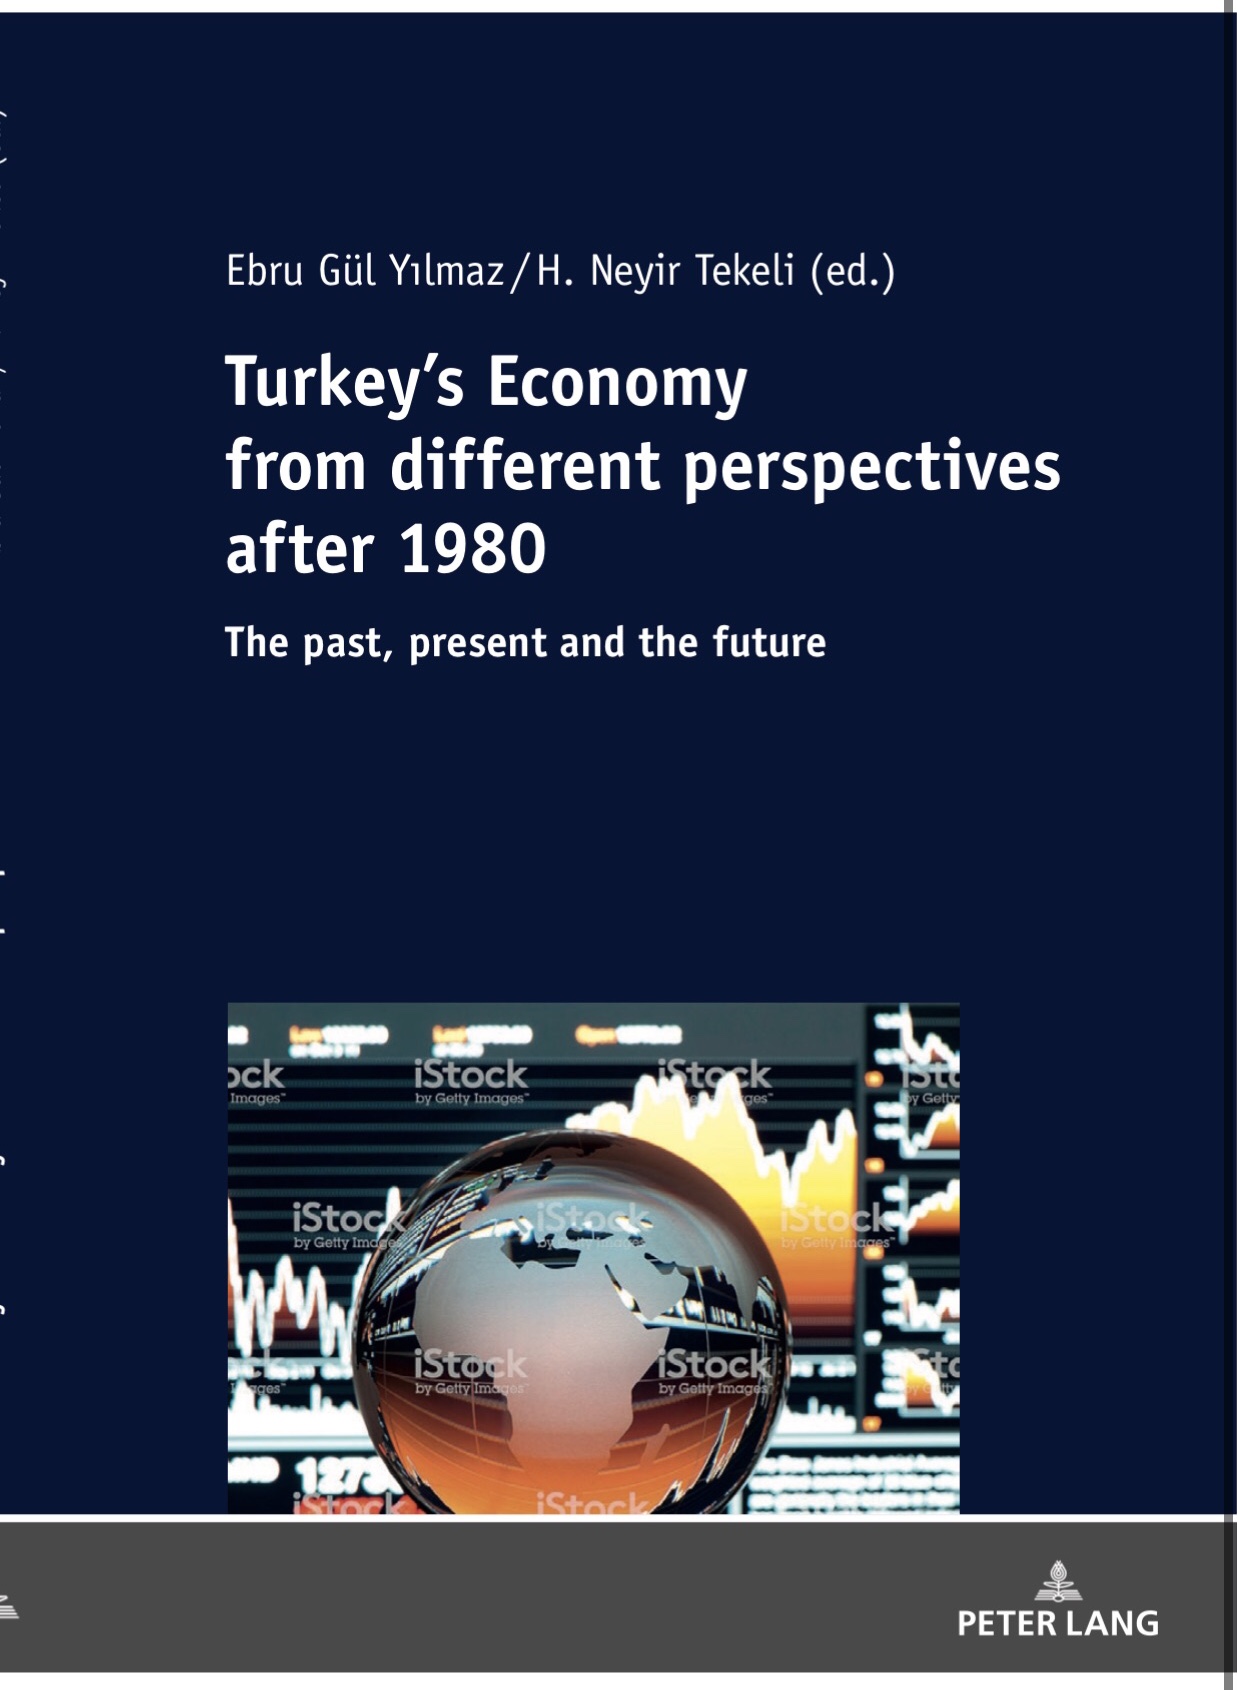  “Turkey’s Economy from Diffrent Perspectives After 1980”